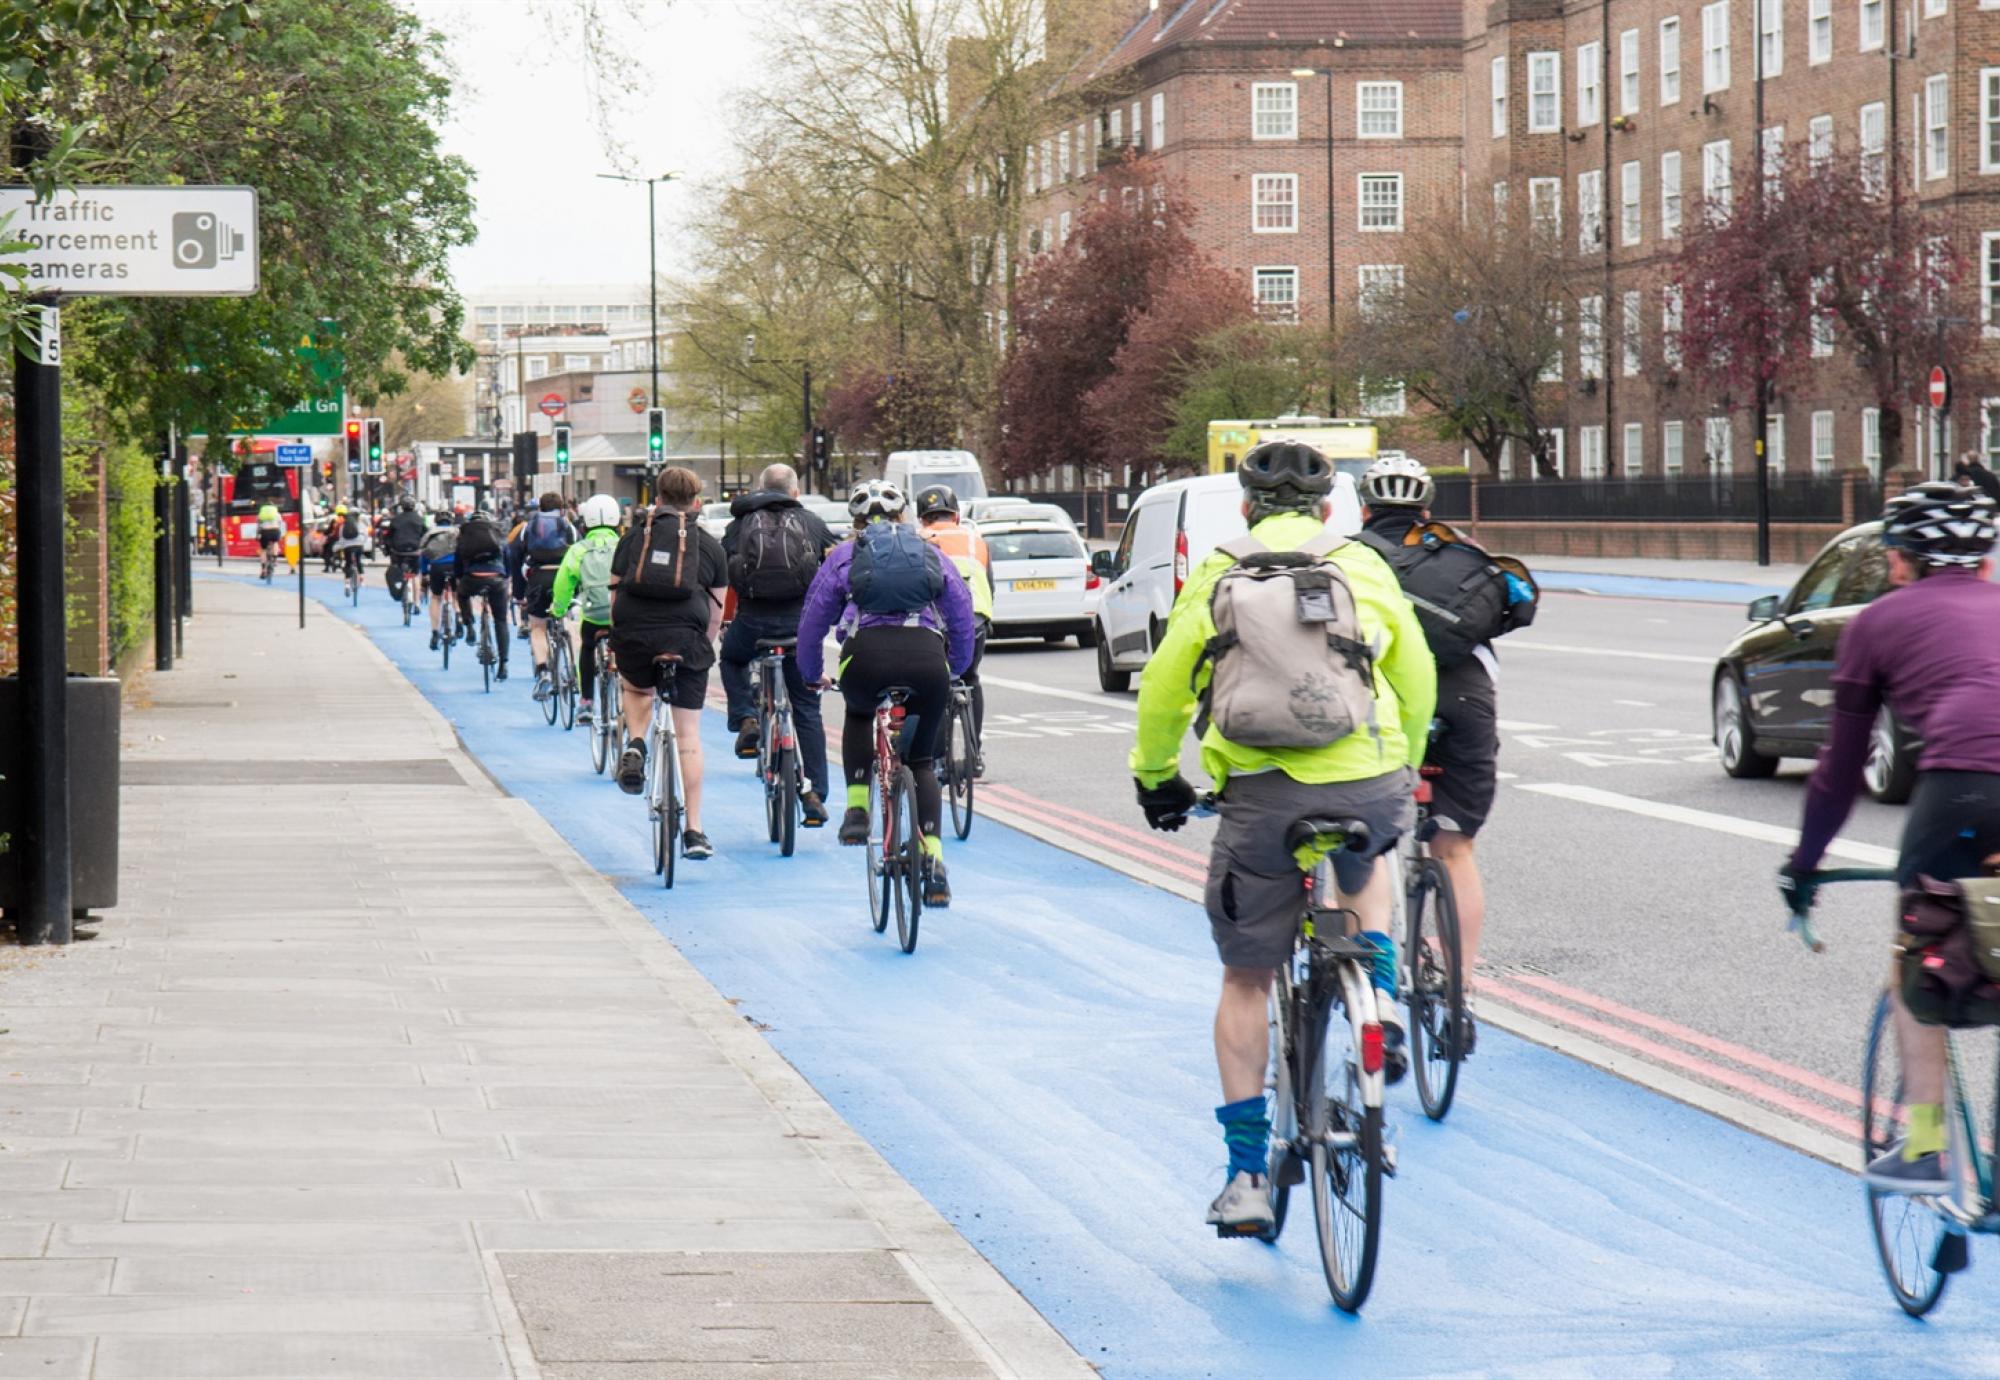 Cyclists in a cycle lane